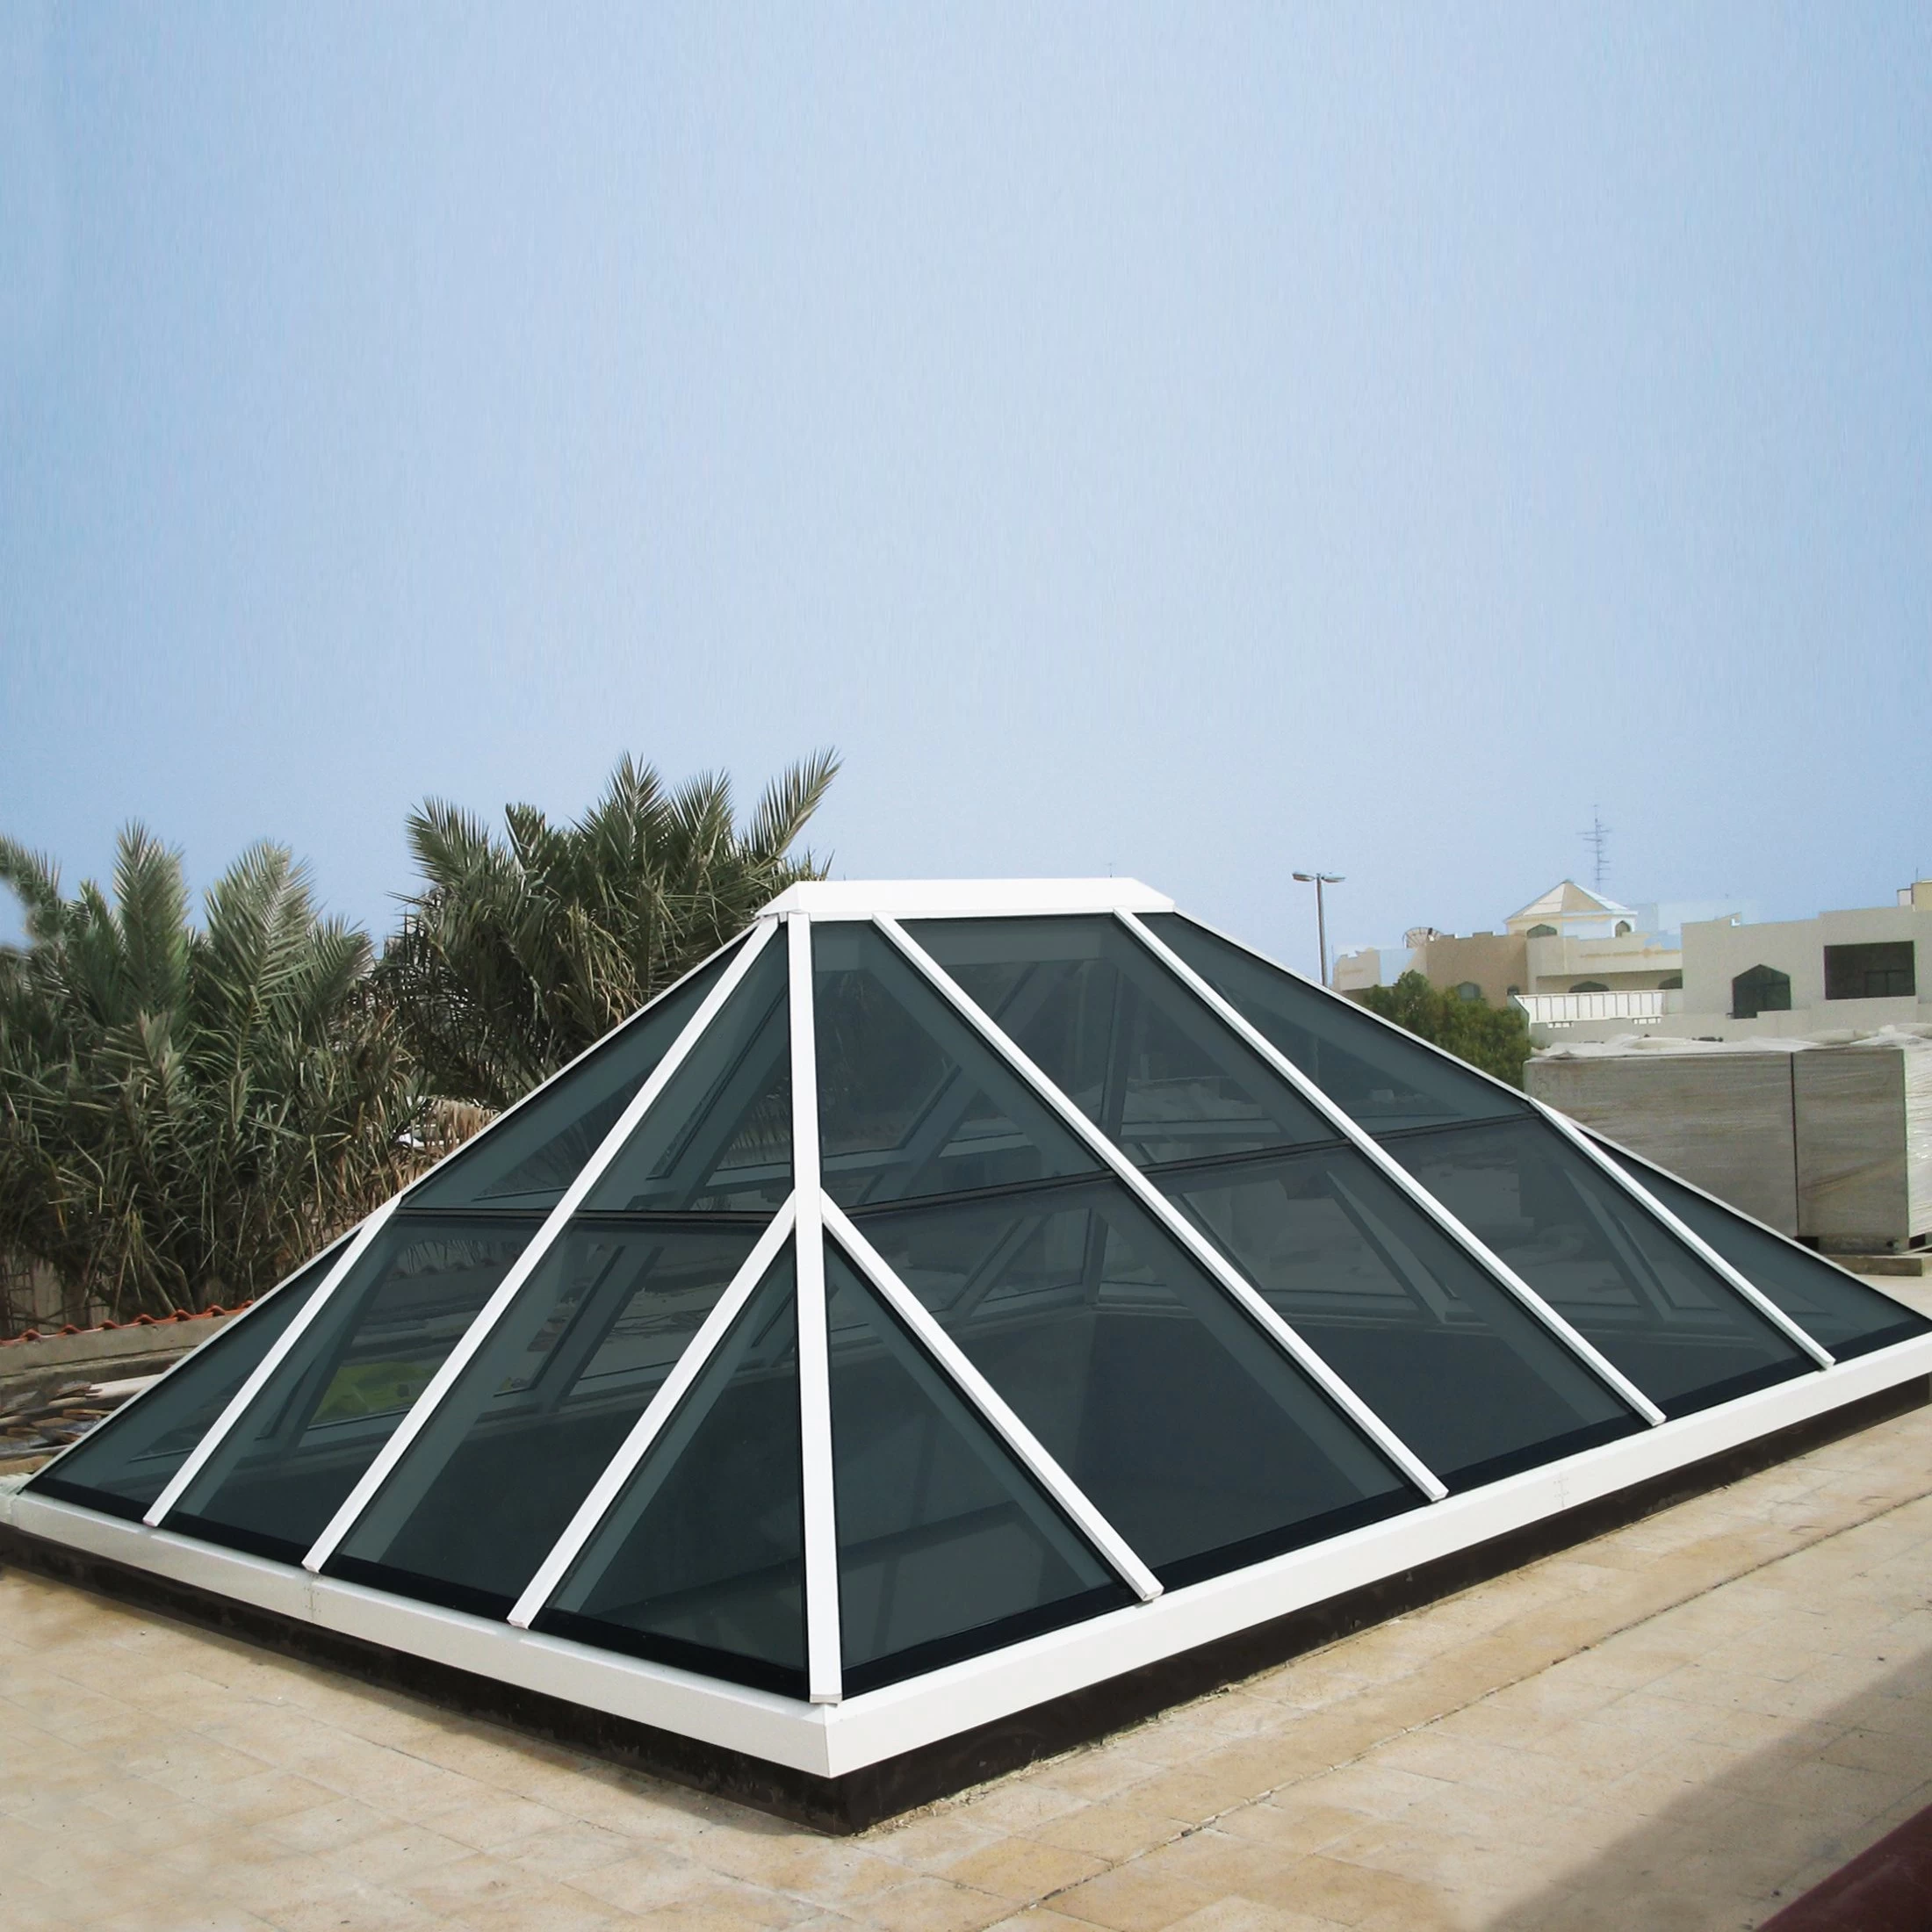 Full solution of glass dome roof, glass canopy, Stainless steel Frame Skylight with Glass